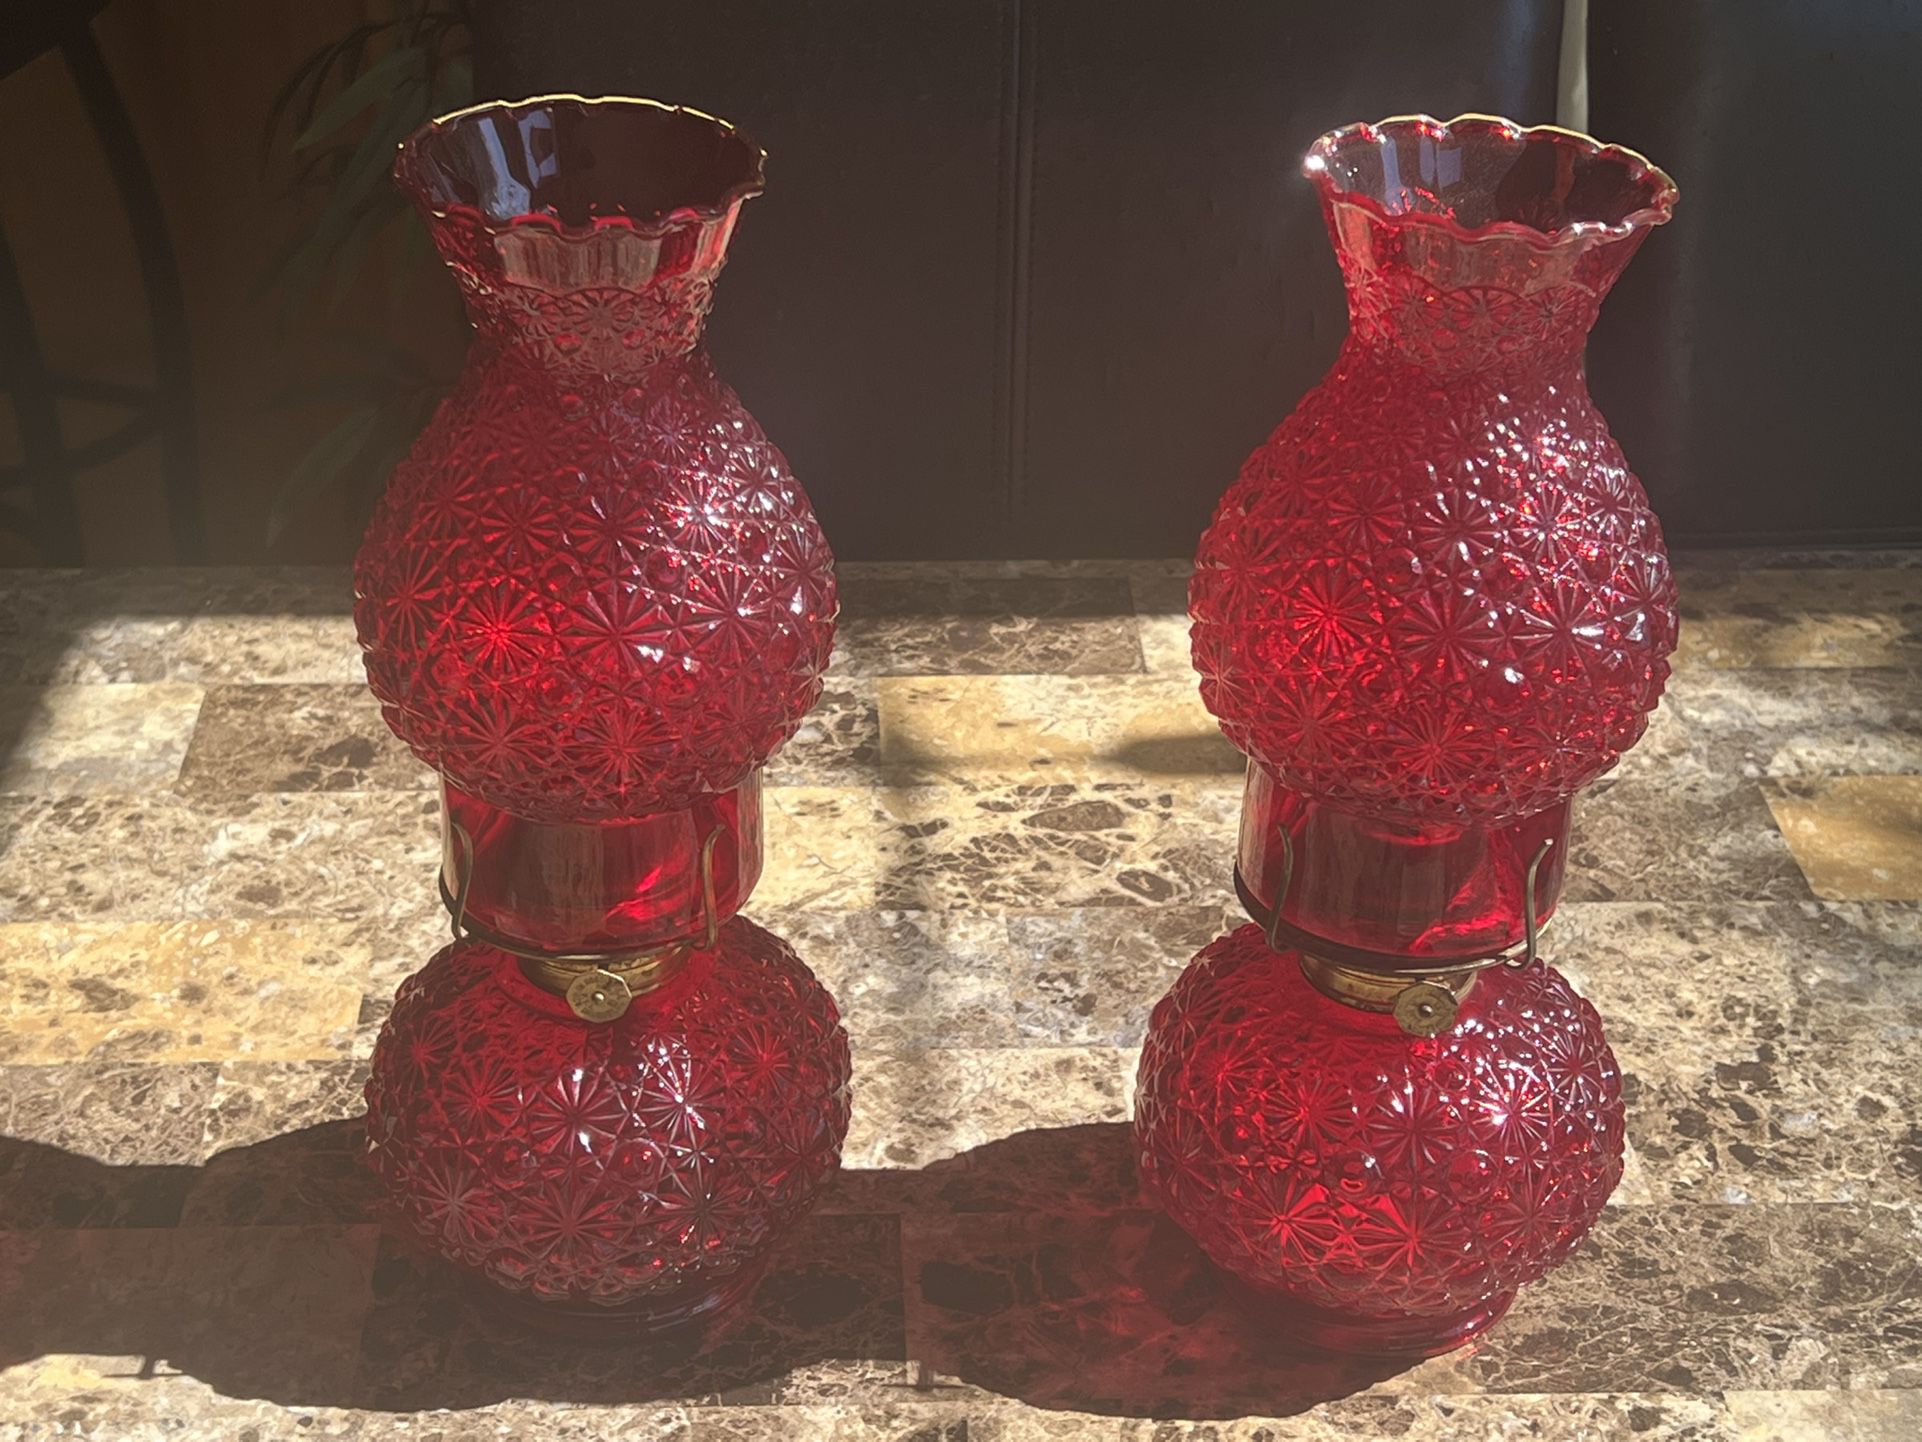 Pair Of Vintage Ruby Red Glass Oil Lamps. 12 Inches High By 5 Inches Wide.